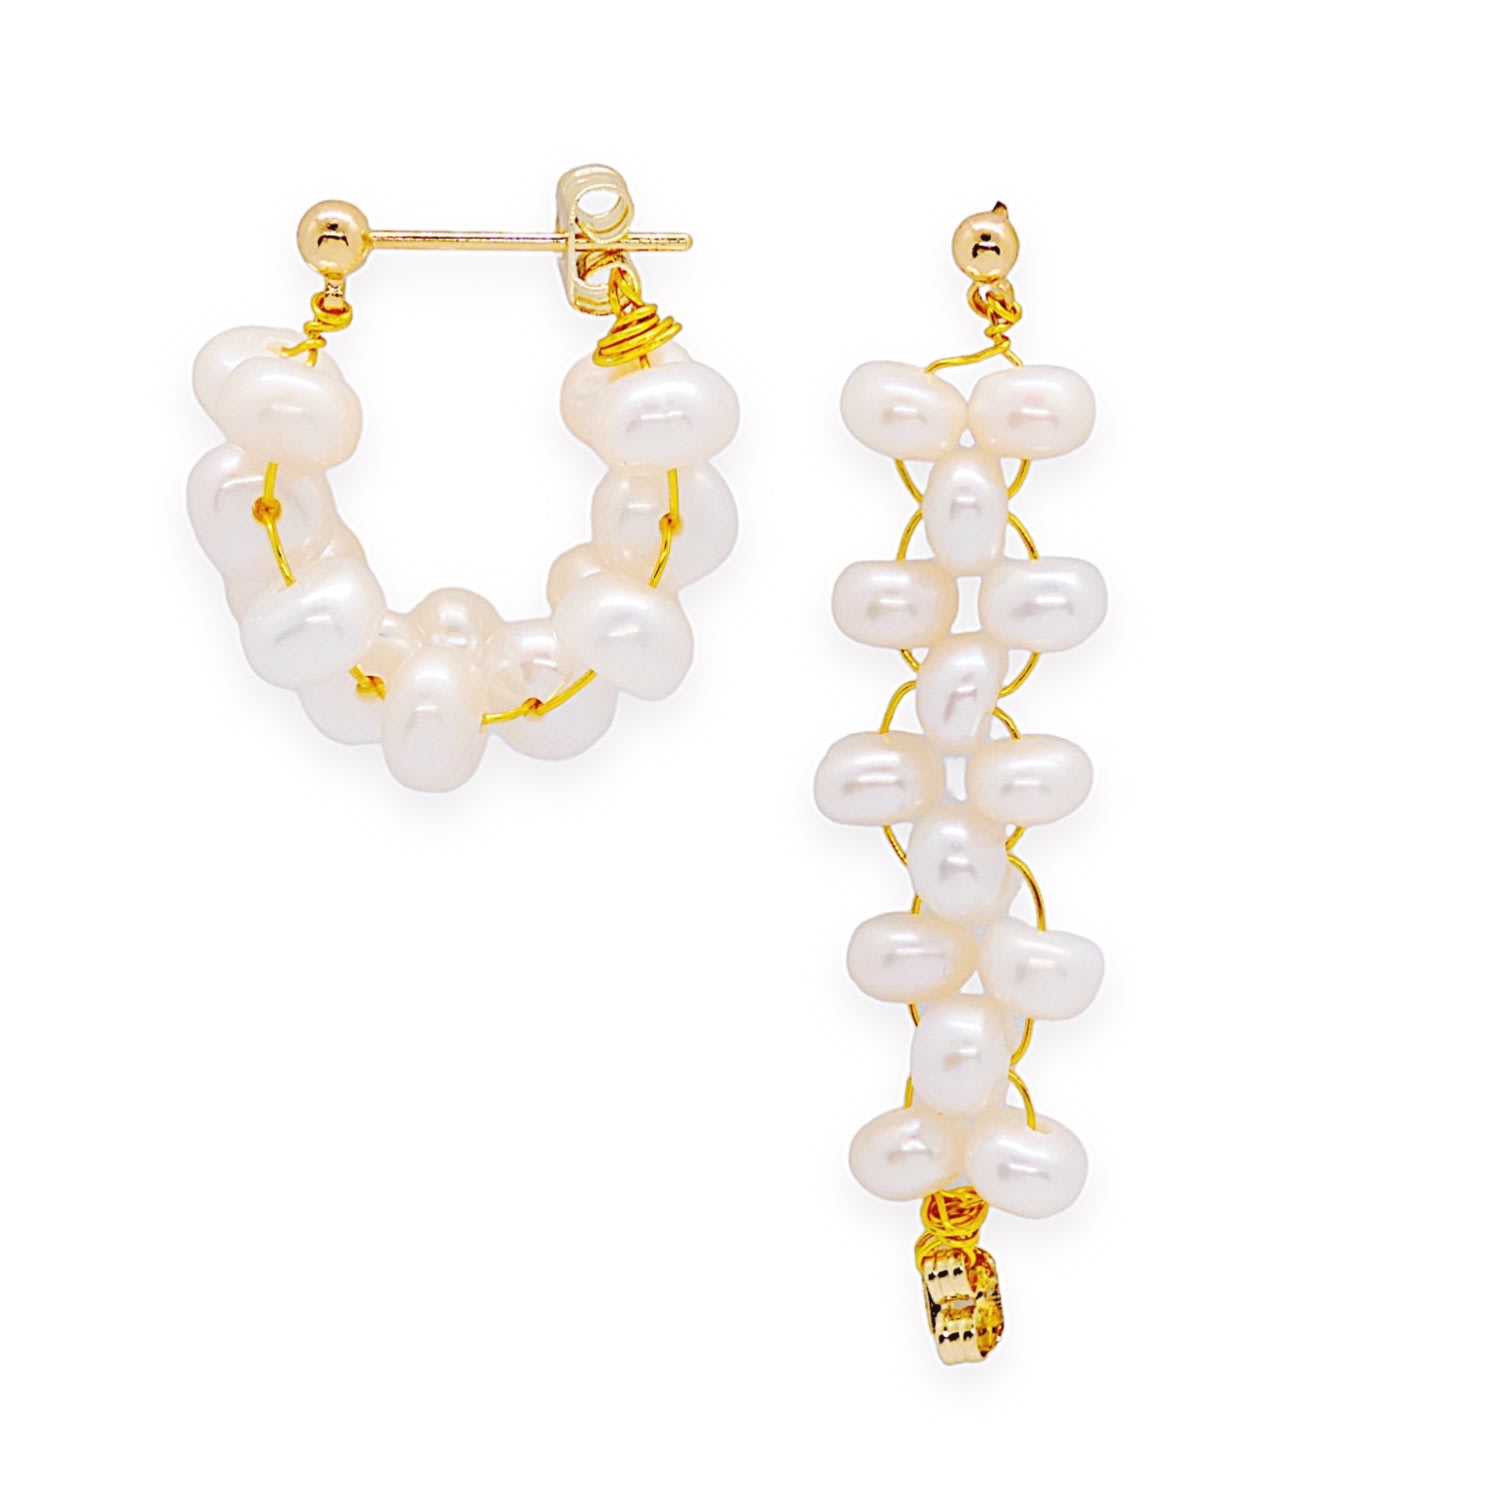 Women's Gold / White Cicily Pearl Chunky Hoops Earrings VALERIE CHIC